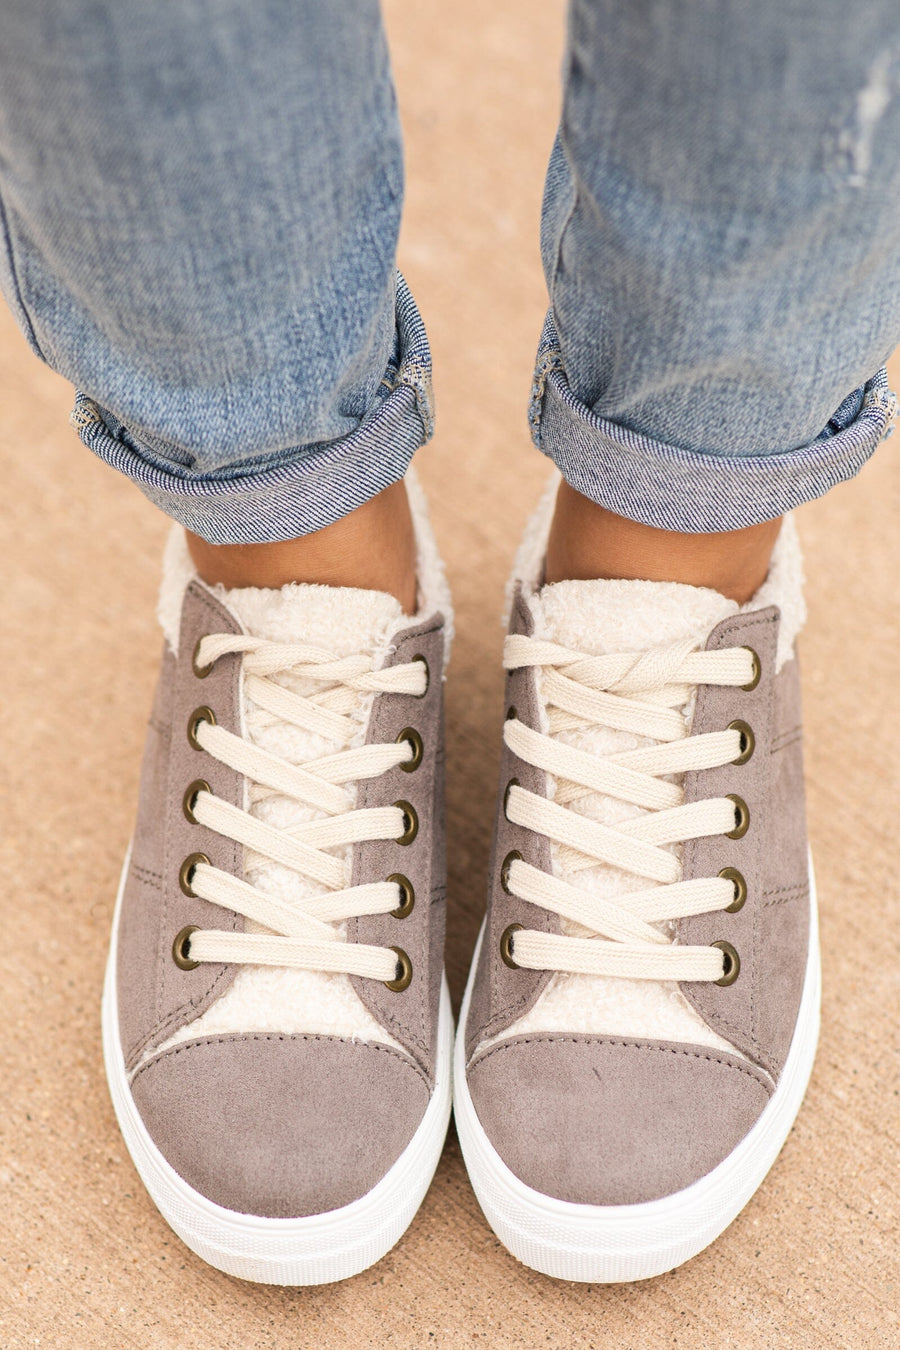 Grey and Beige Lace Up Sneakers - Filly Flair